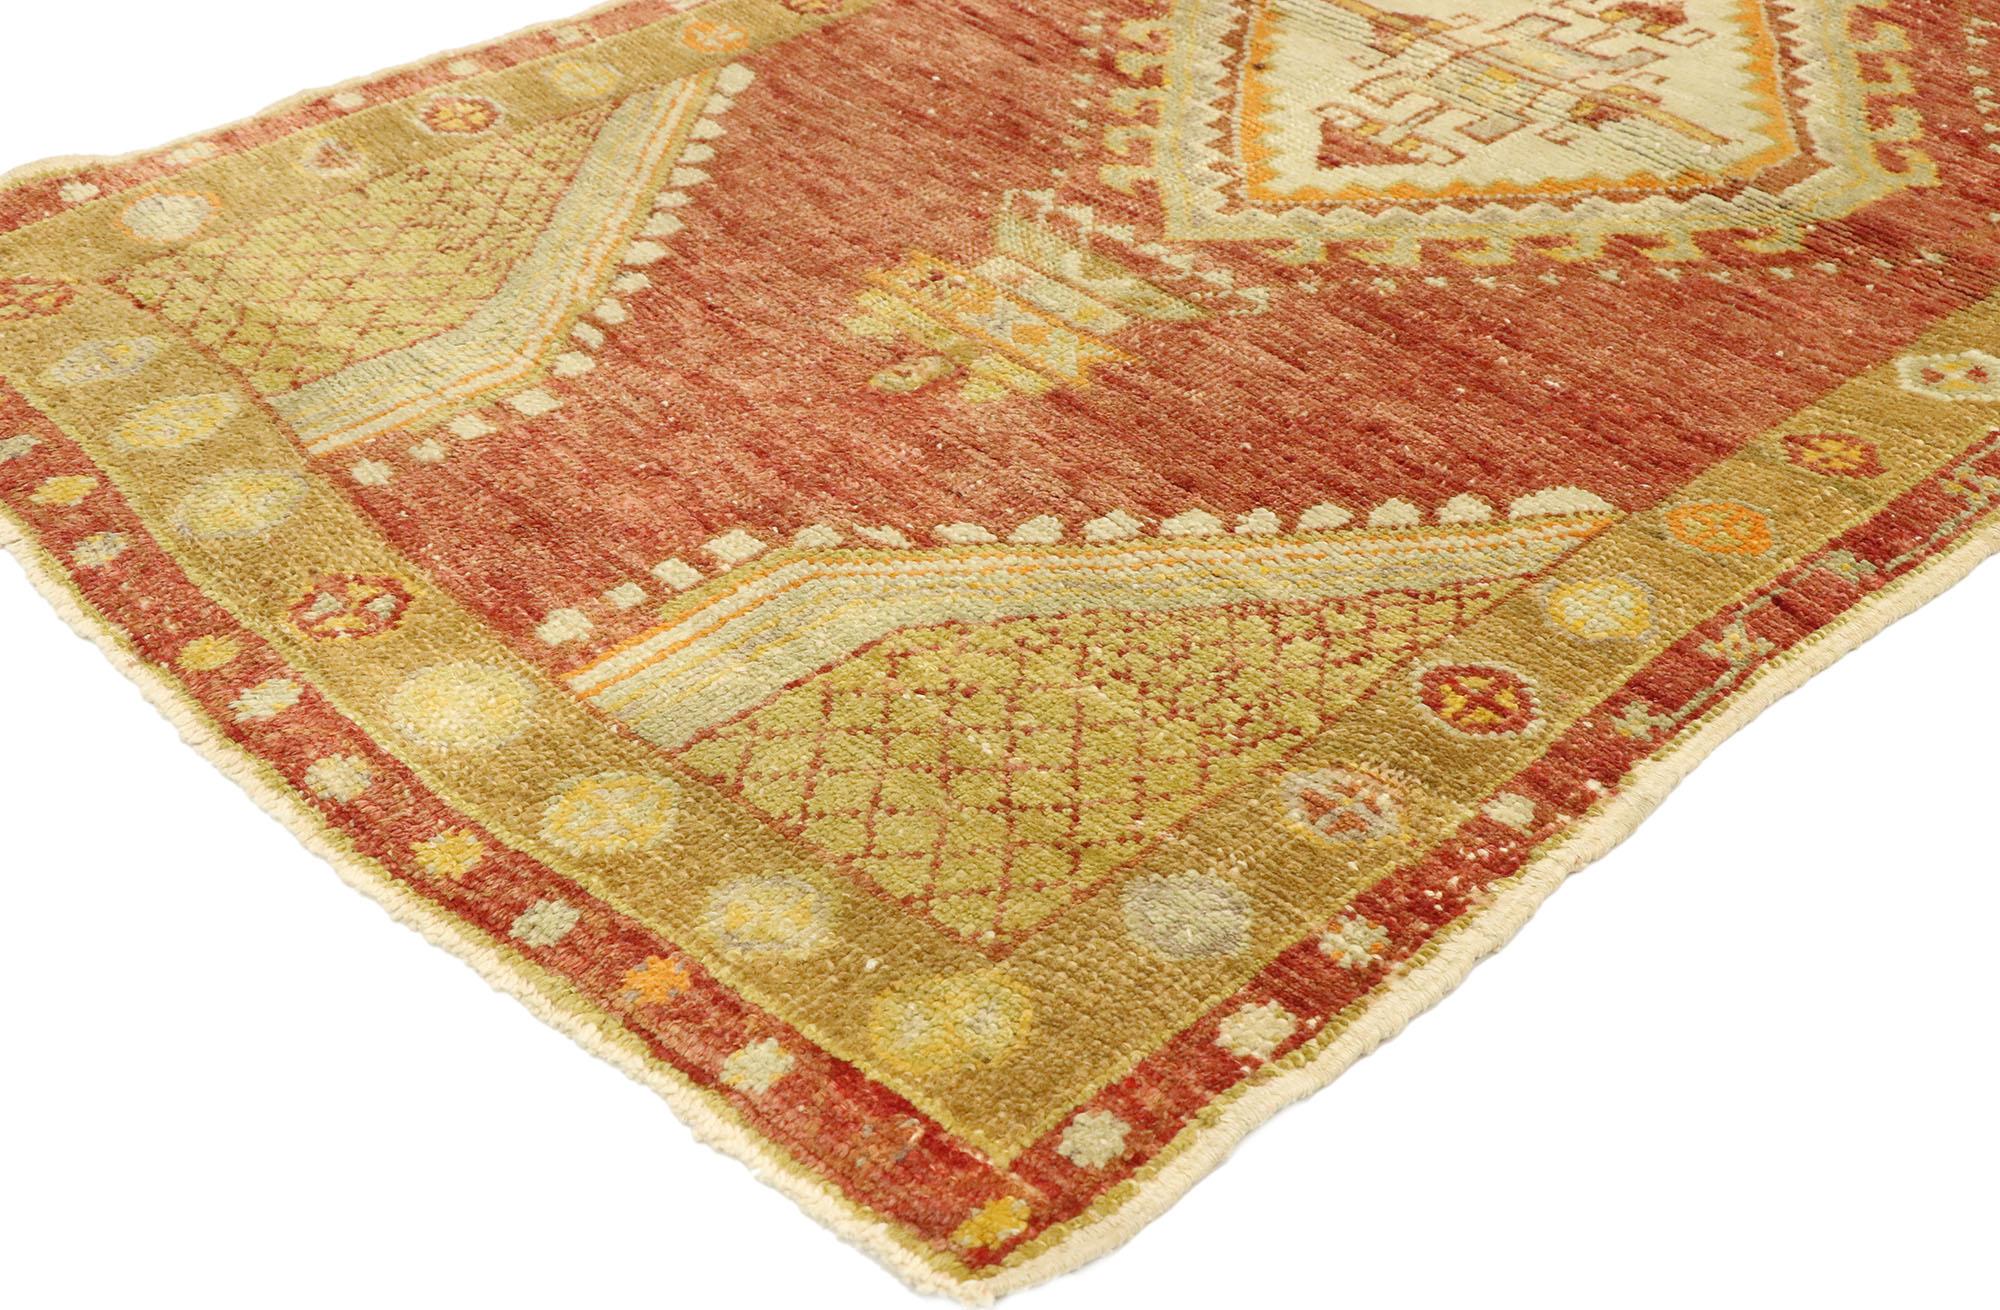 51209, vintage Turkish Oushak rug with modern rustic style 02'08 X 04'05. With vibrant colors and rustic sensibility, this hand knotted wool vintage Turkish Oushak rug is poised to impress. The abrashed field features a hooked lozenge amulet